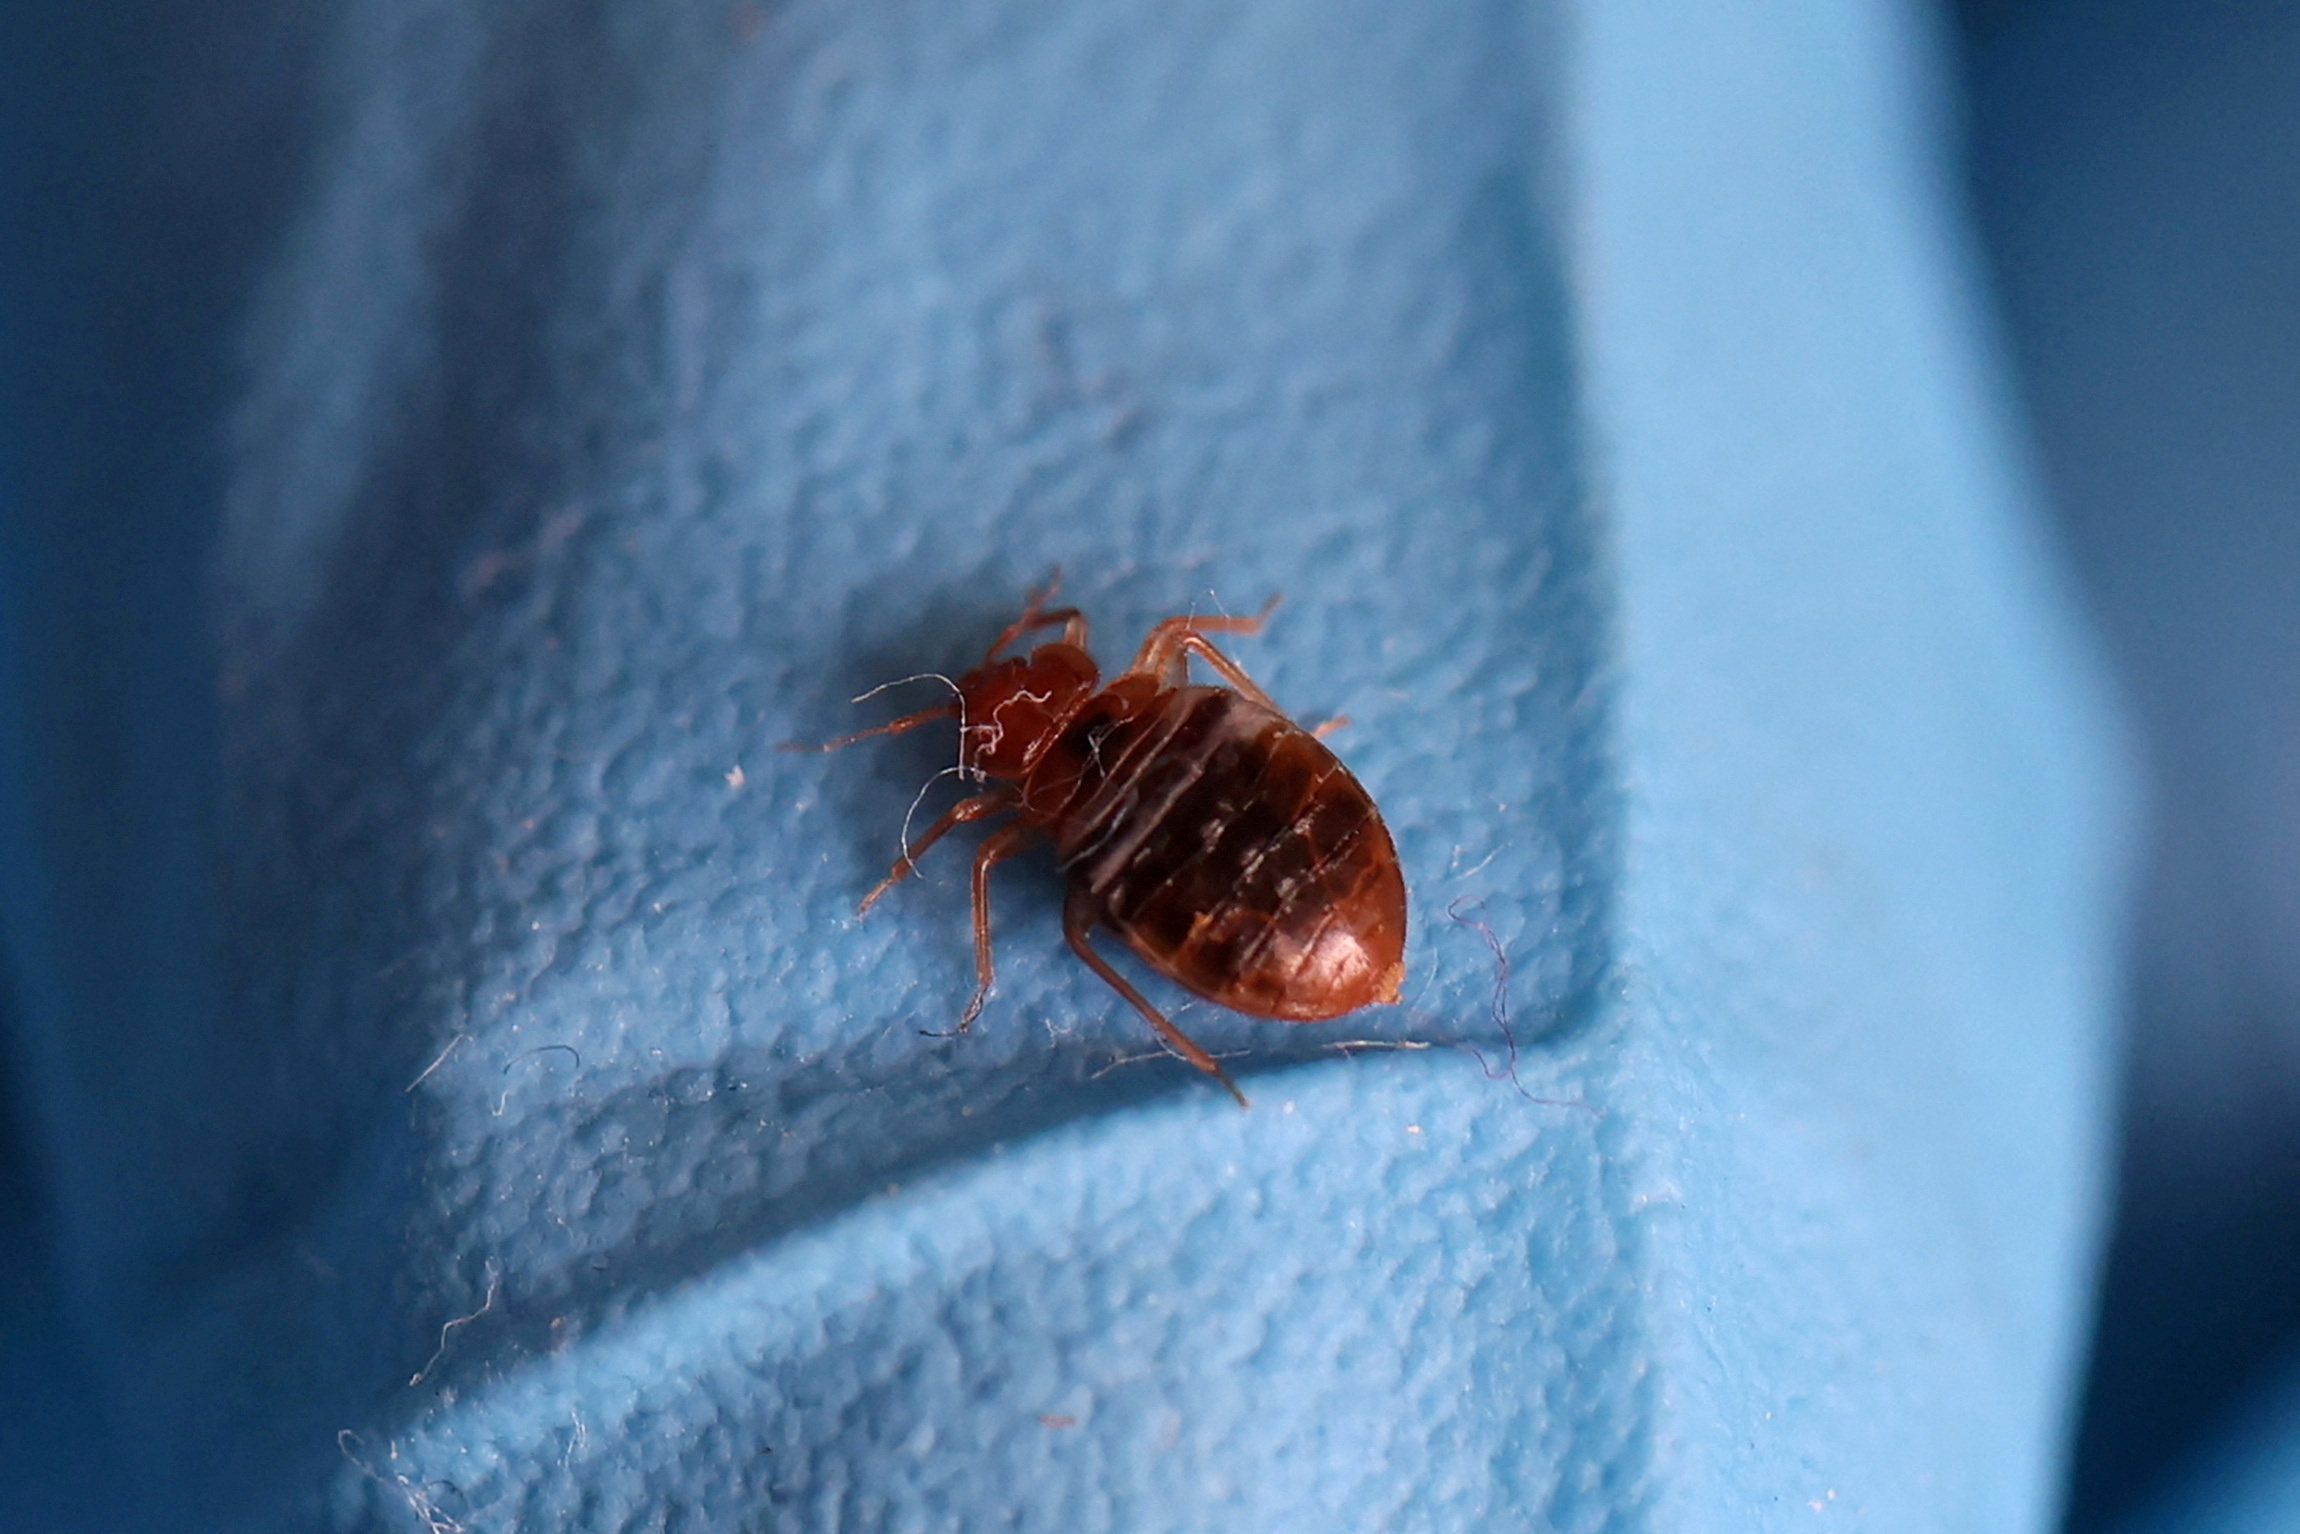 Bedbugs are not known to spread disease and commonly move from one location to another such as furniture, beds, clothes and baggage. Photo: Reuters